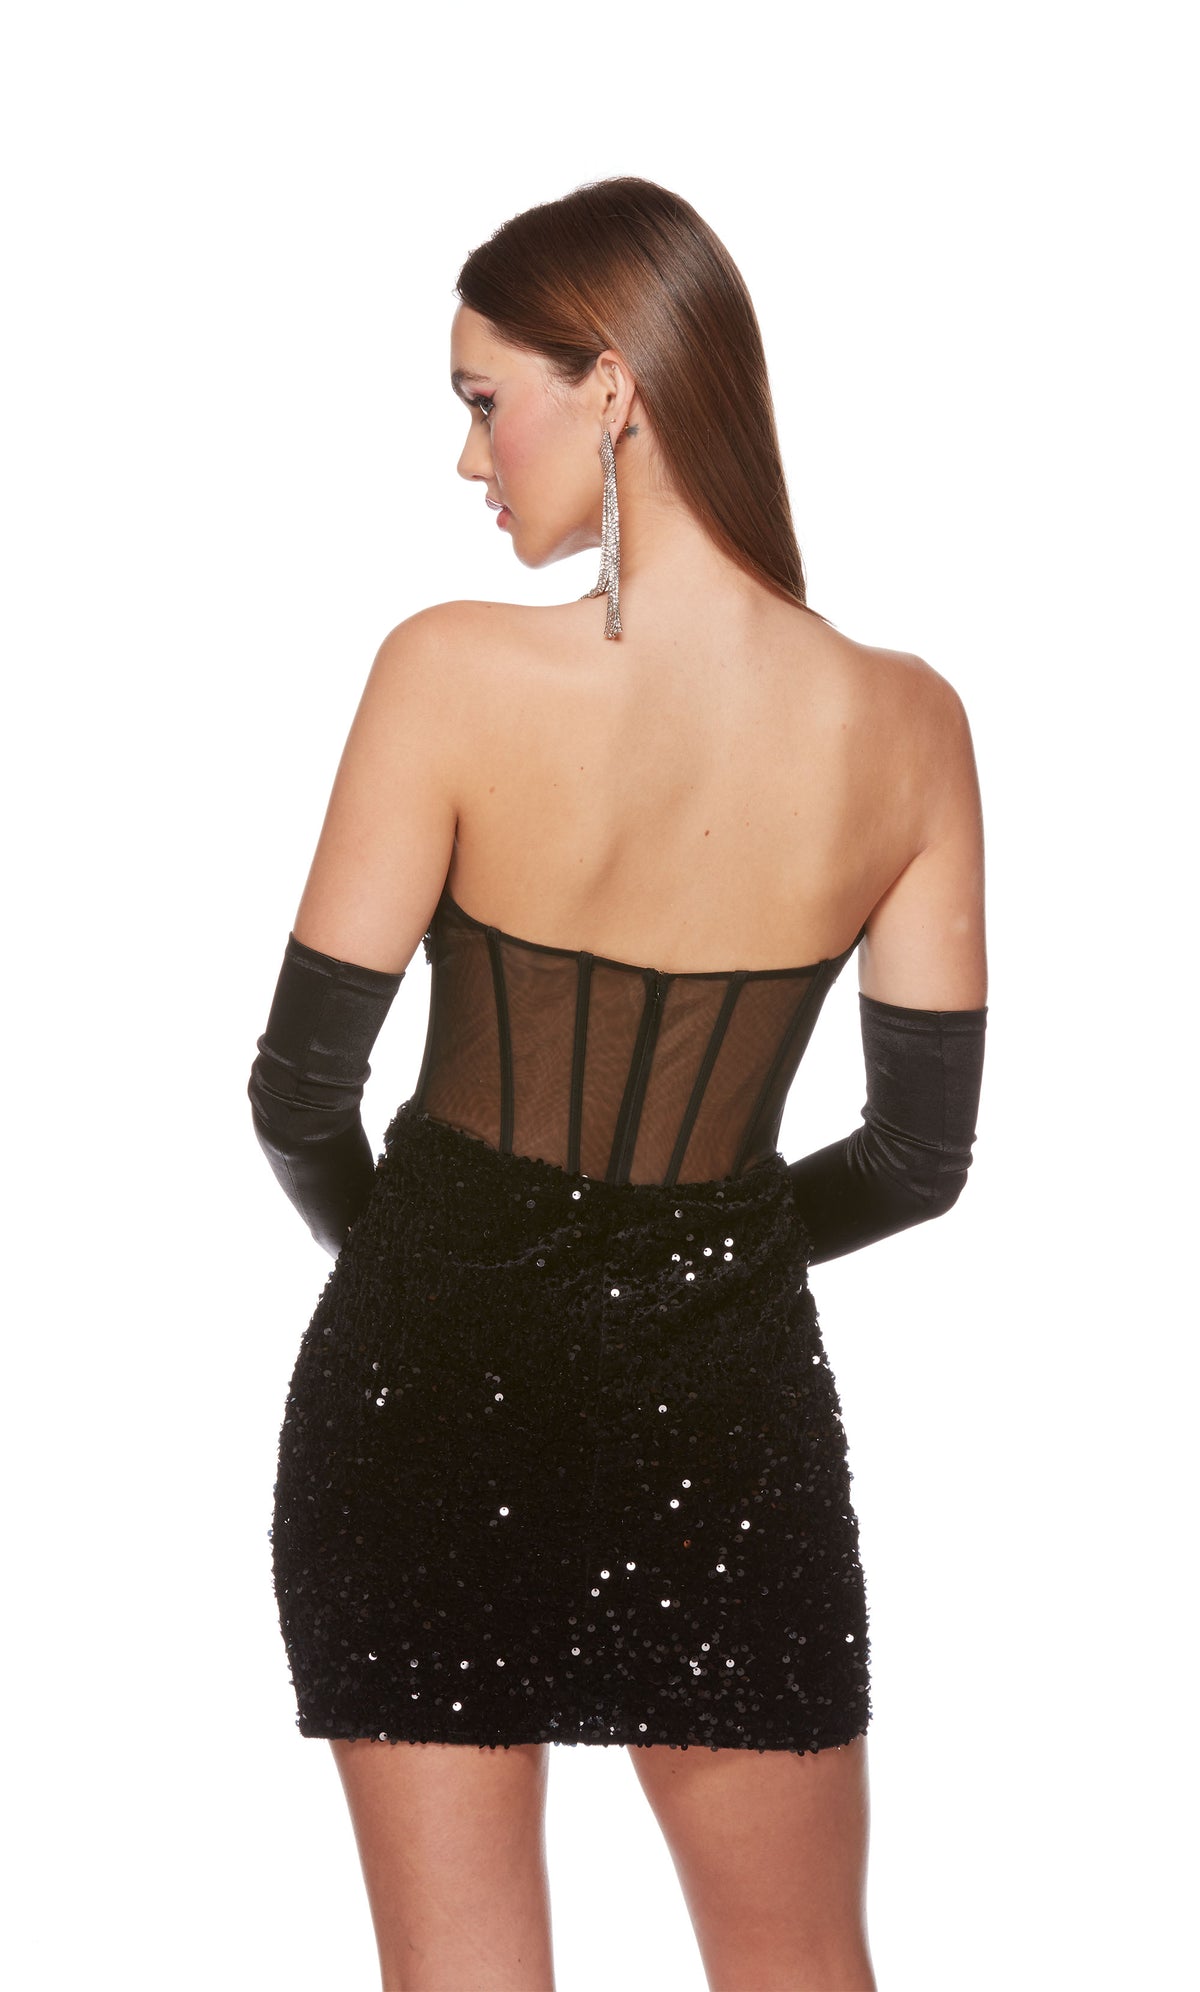 A glamorous corset top dress featuring a strapless zip-up back and sheer bodice, in black plush sequins. The dress was accessorized with long black satin gloves which are not included with dress purchase.